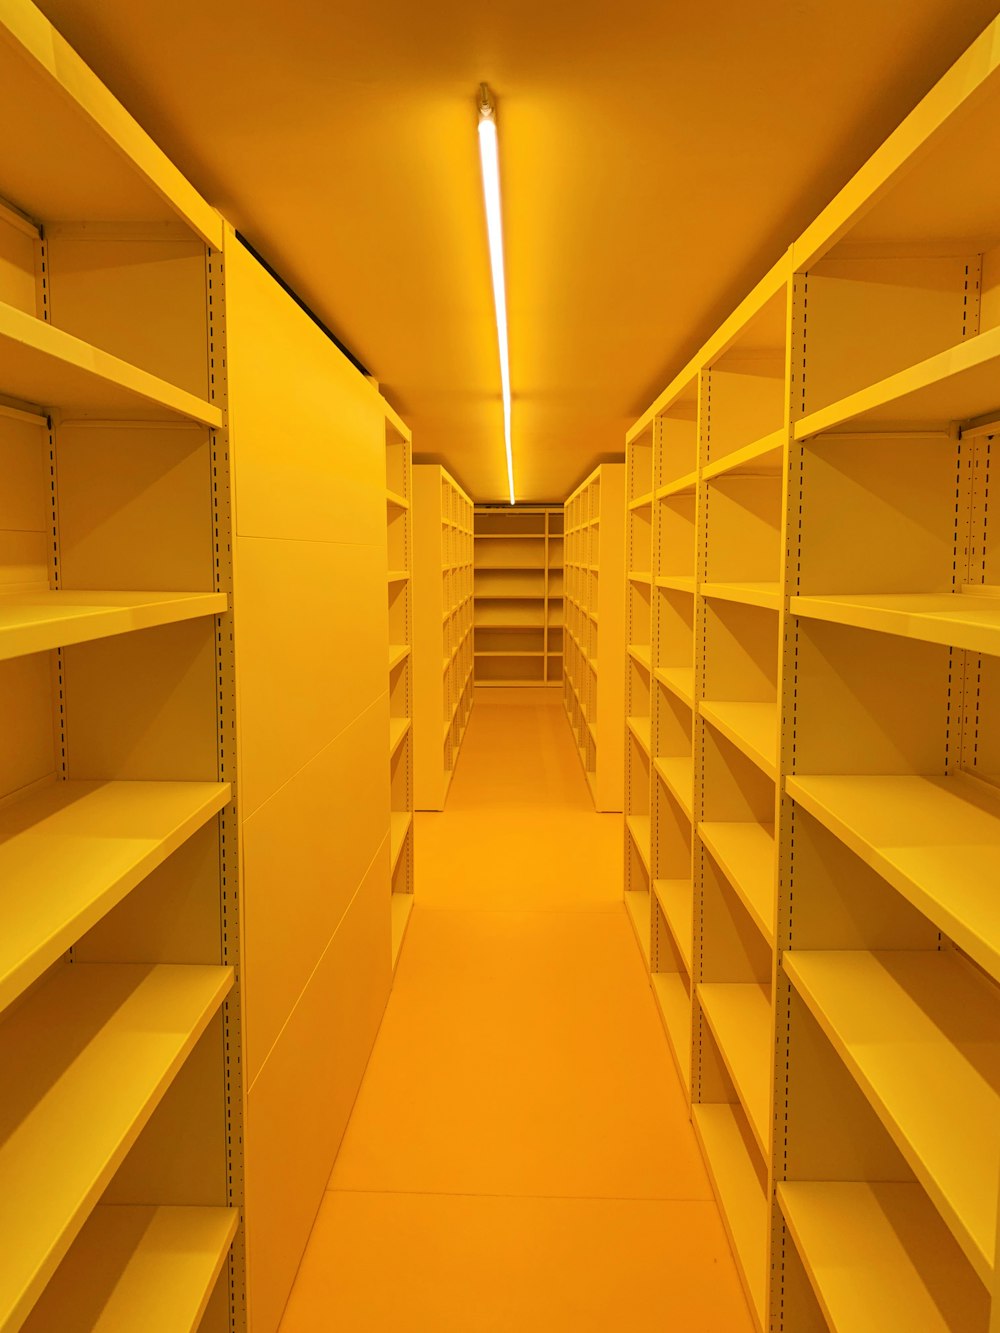 a long row of shelves in a yellow room